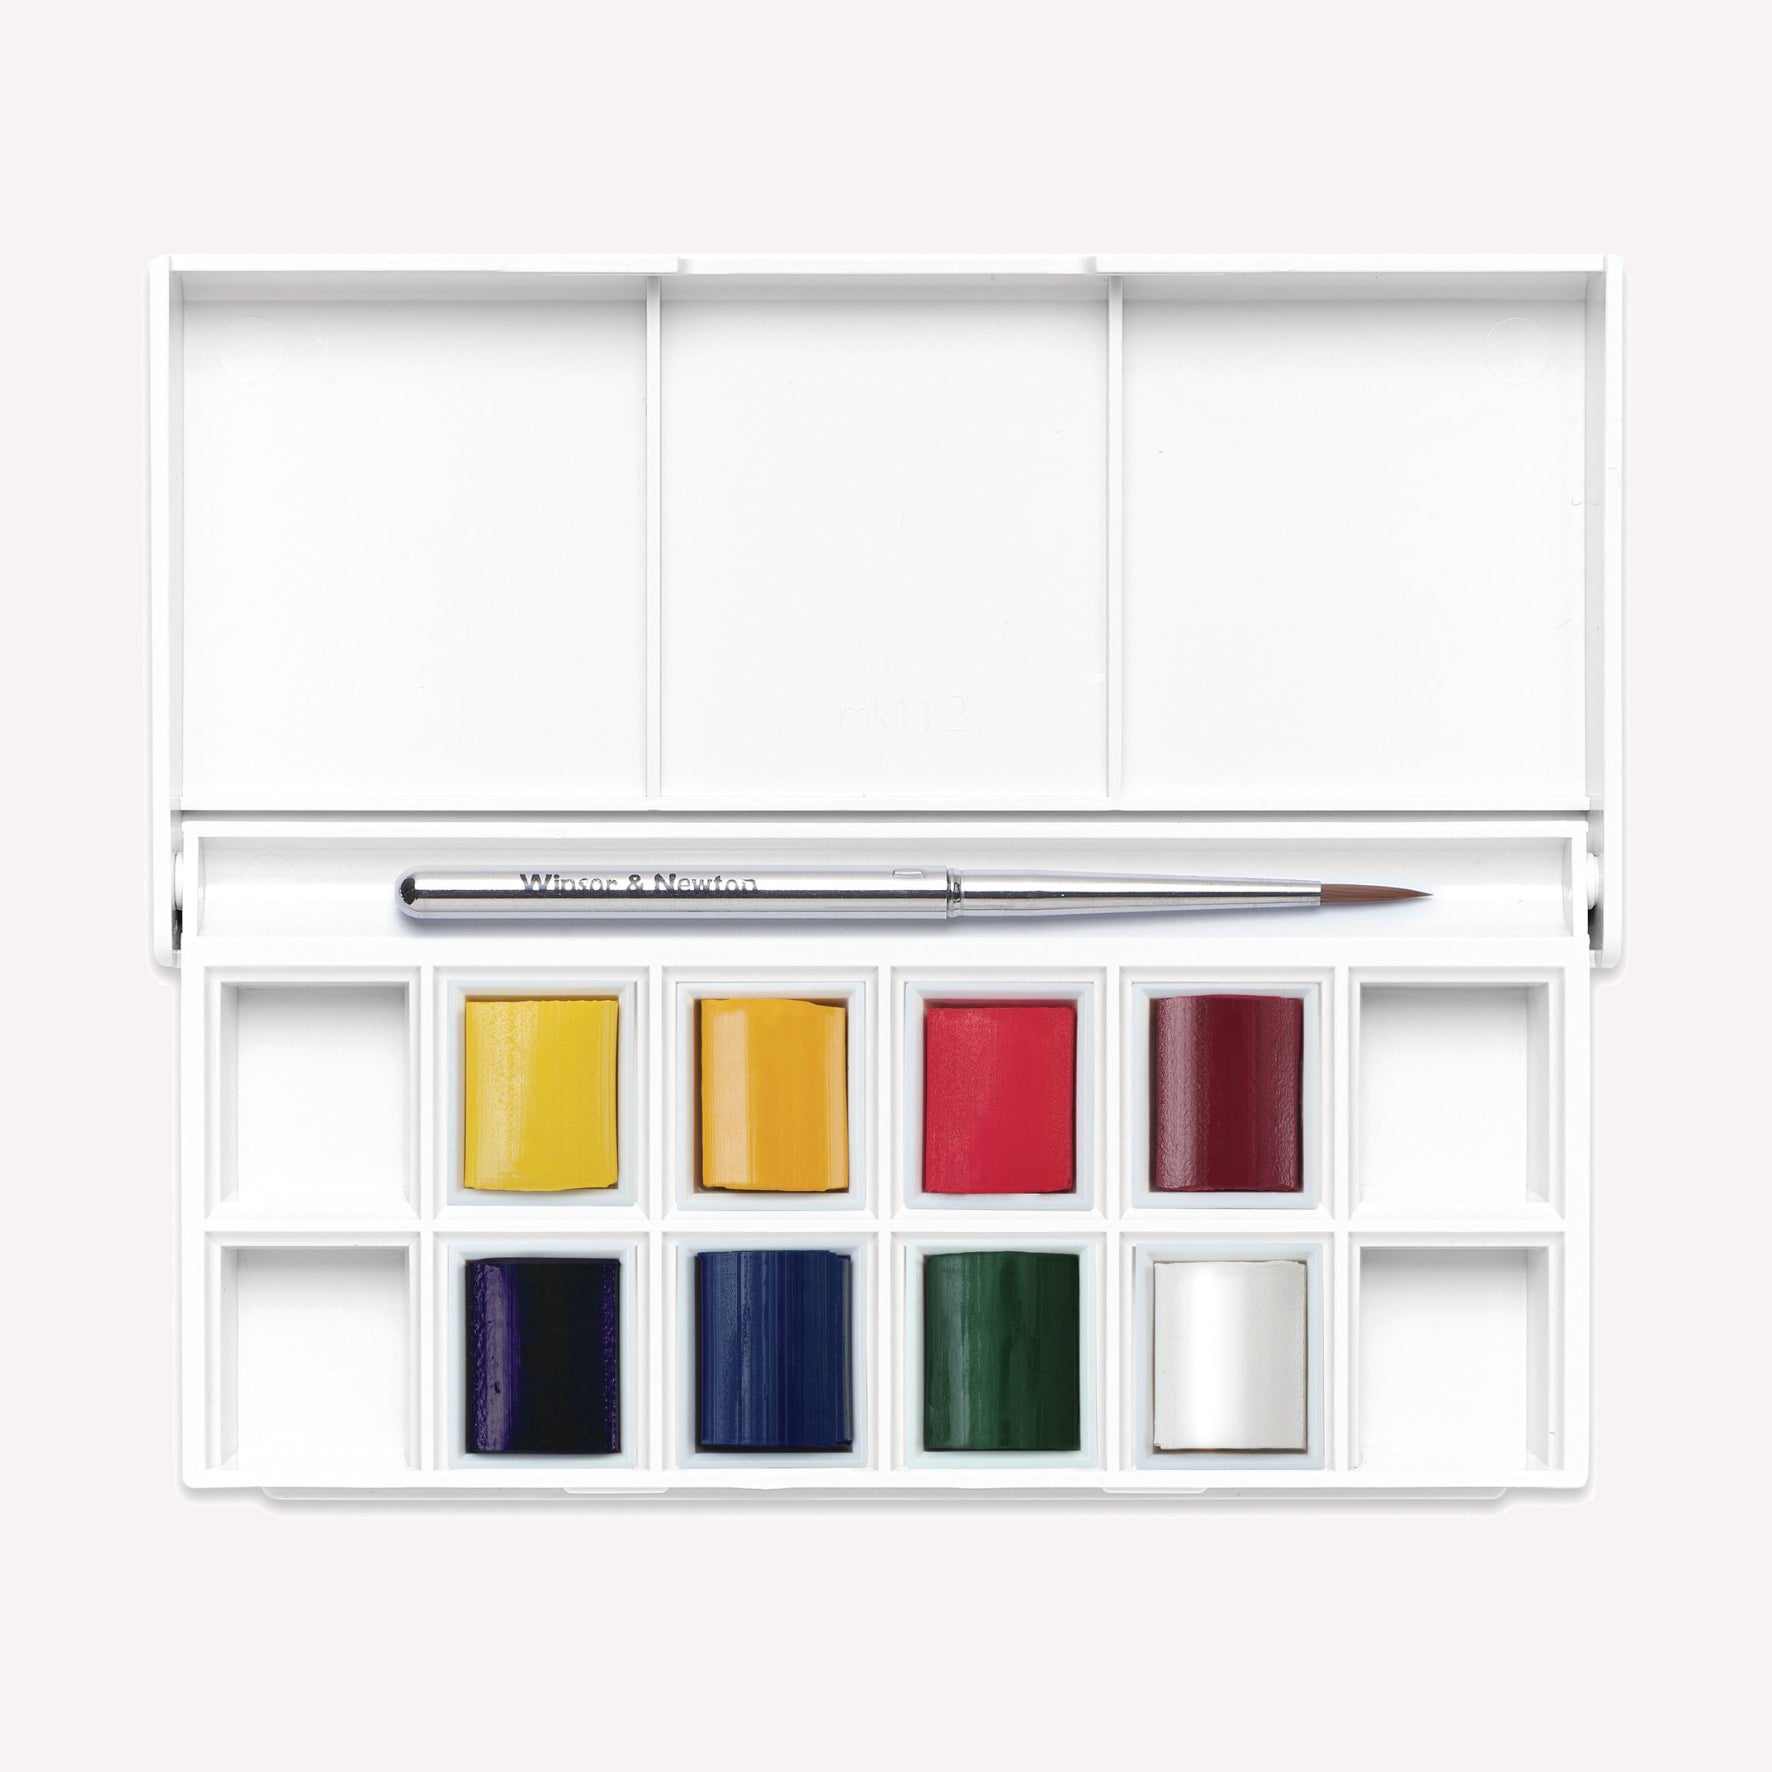 Cotman Watercolour Floral pocket set, with 8 half pan paints in a curated palette for floral work, presented in a plastic palette packaging with a travel brush. 